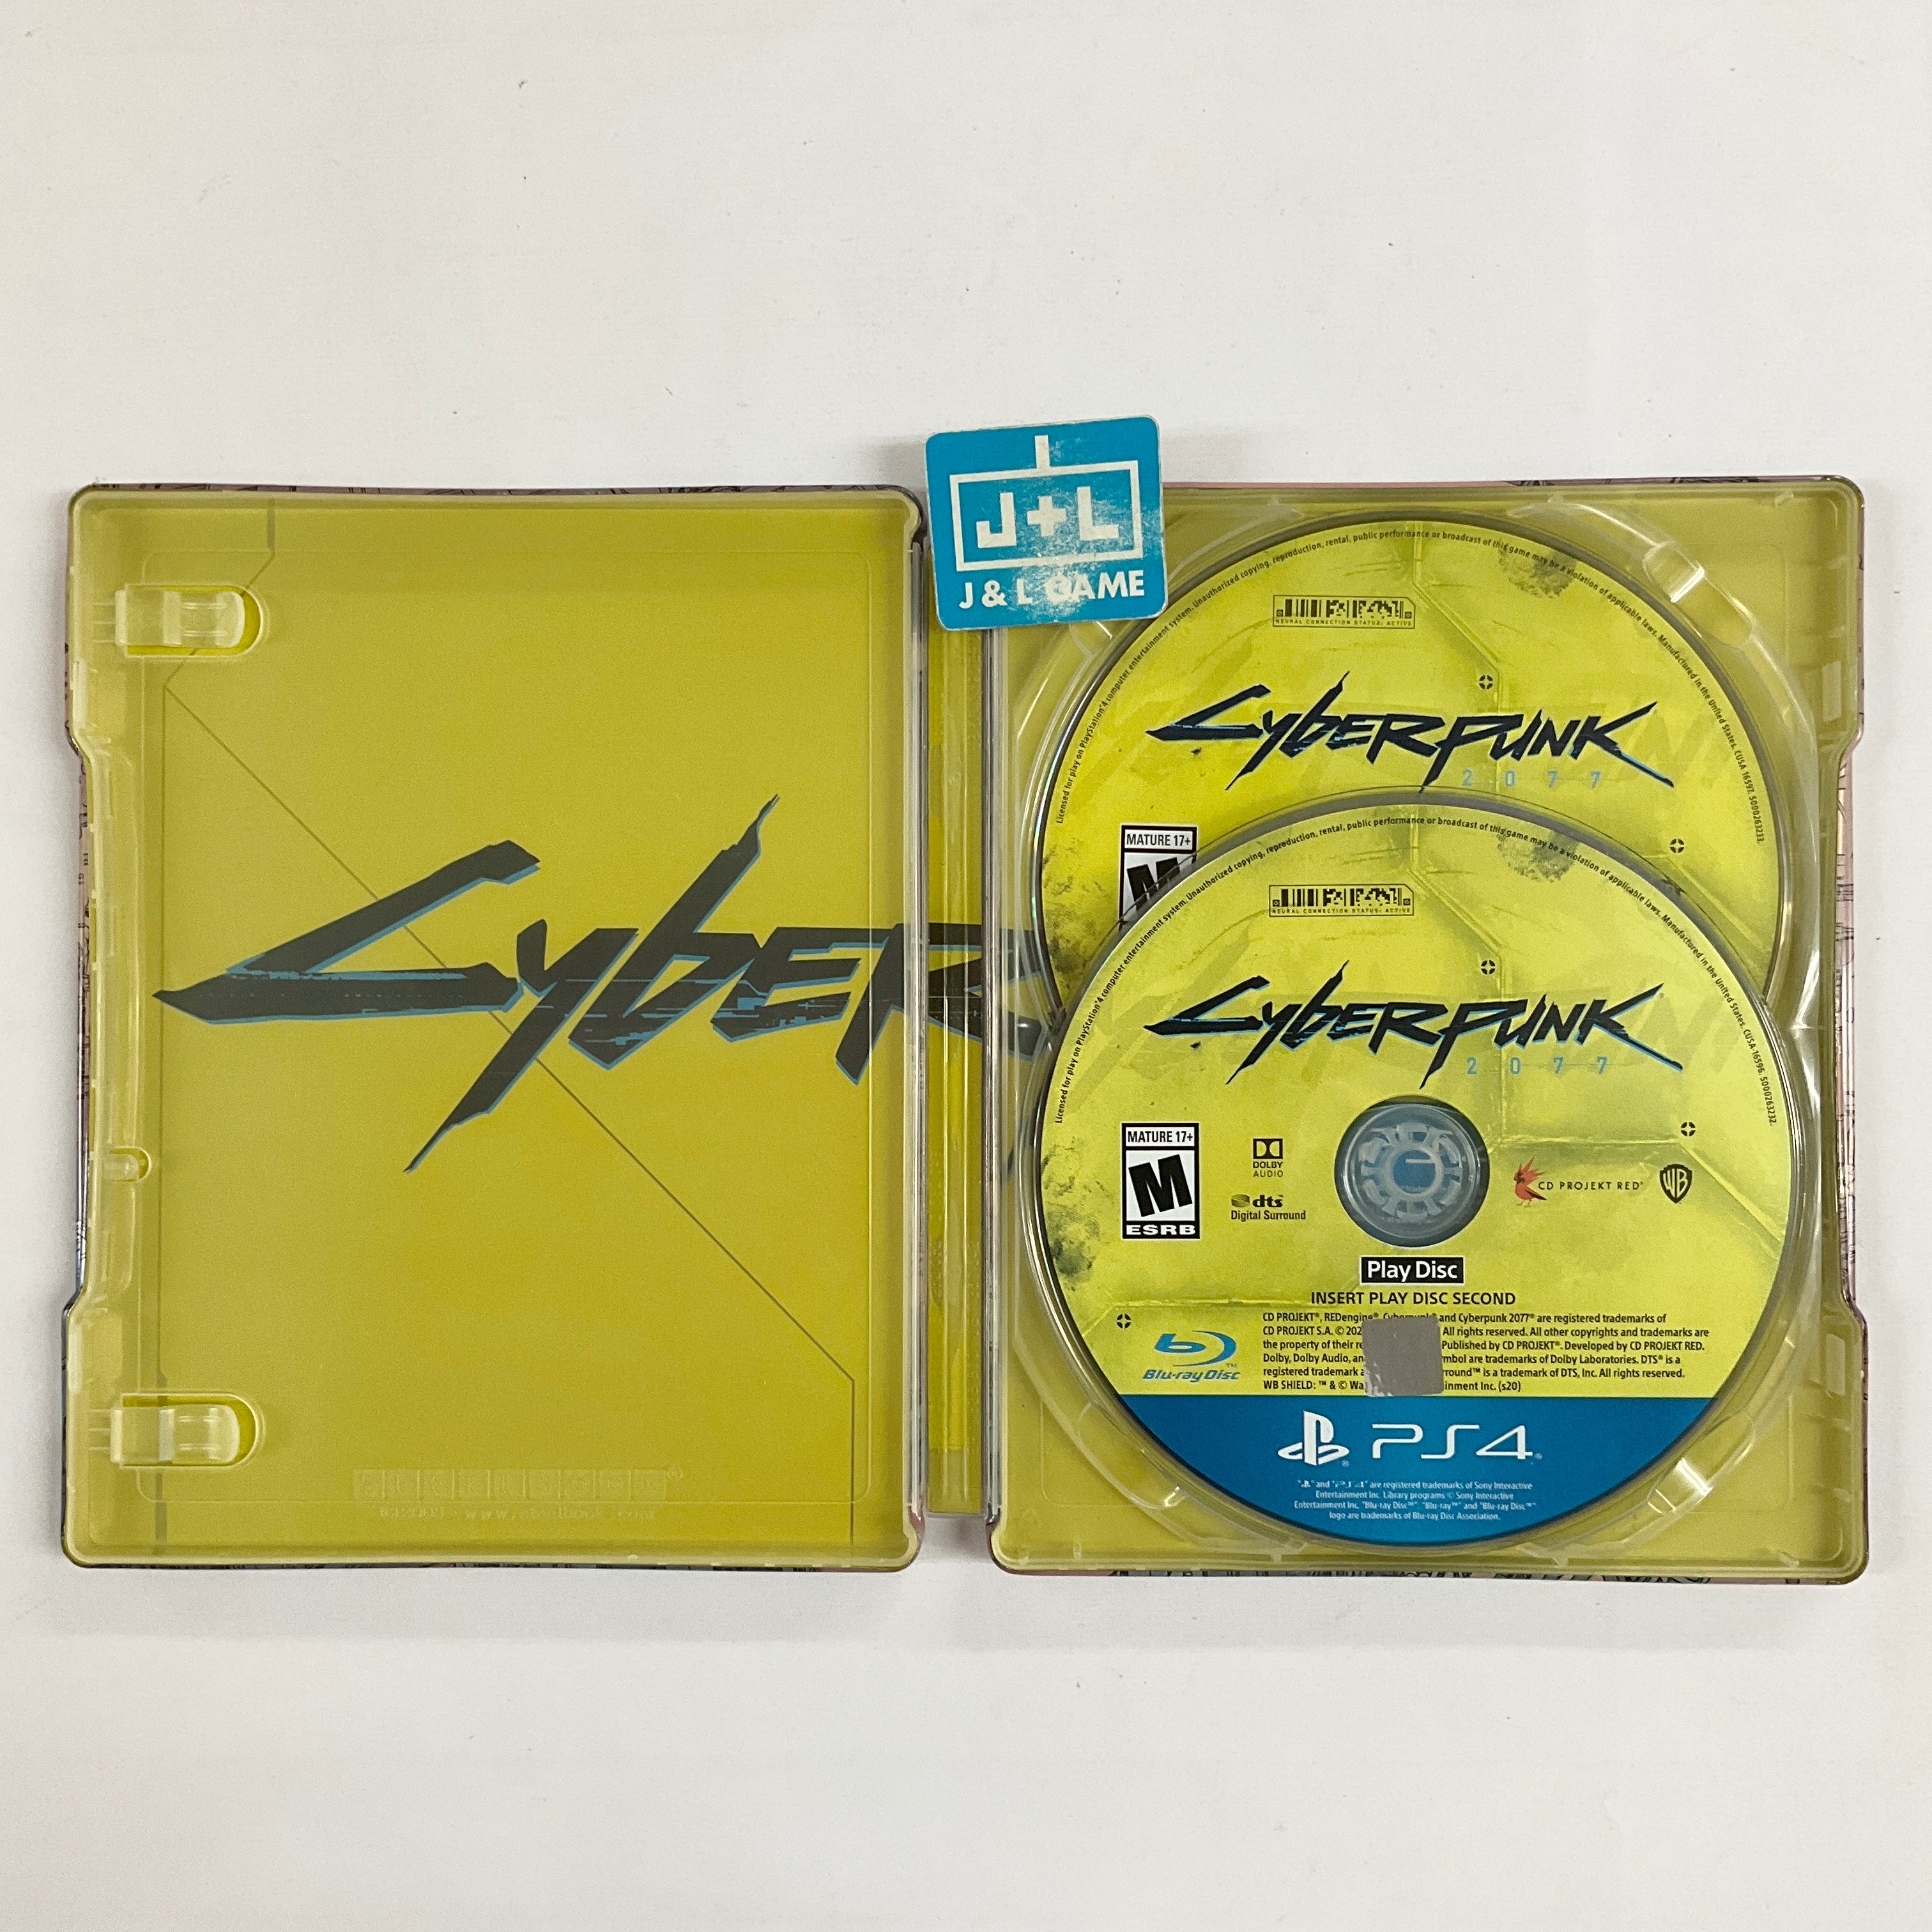 Cyberpunk 2077 (Steelbook) - (PS4) PlayStation 4 [Pre-Owned] Video Games WB Games   